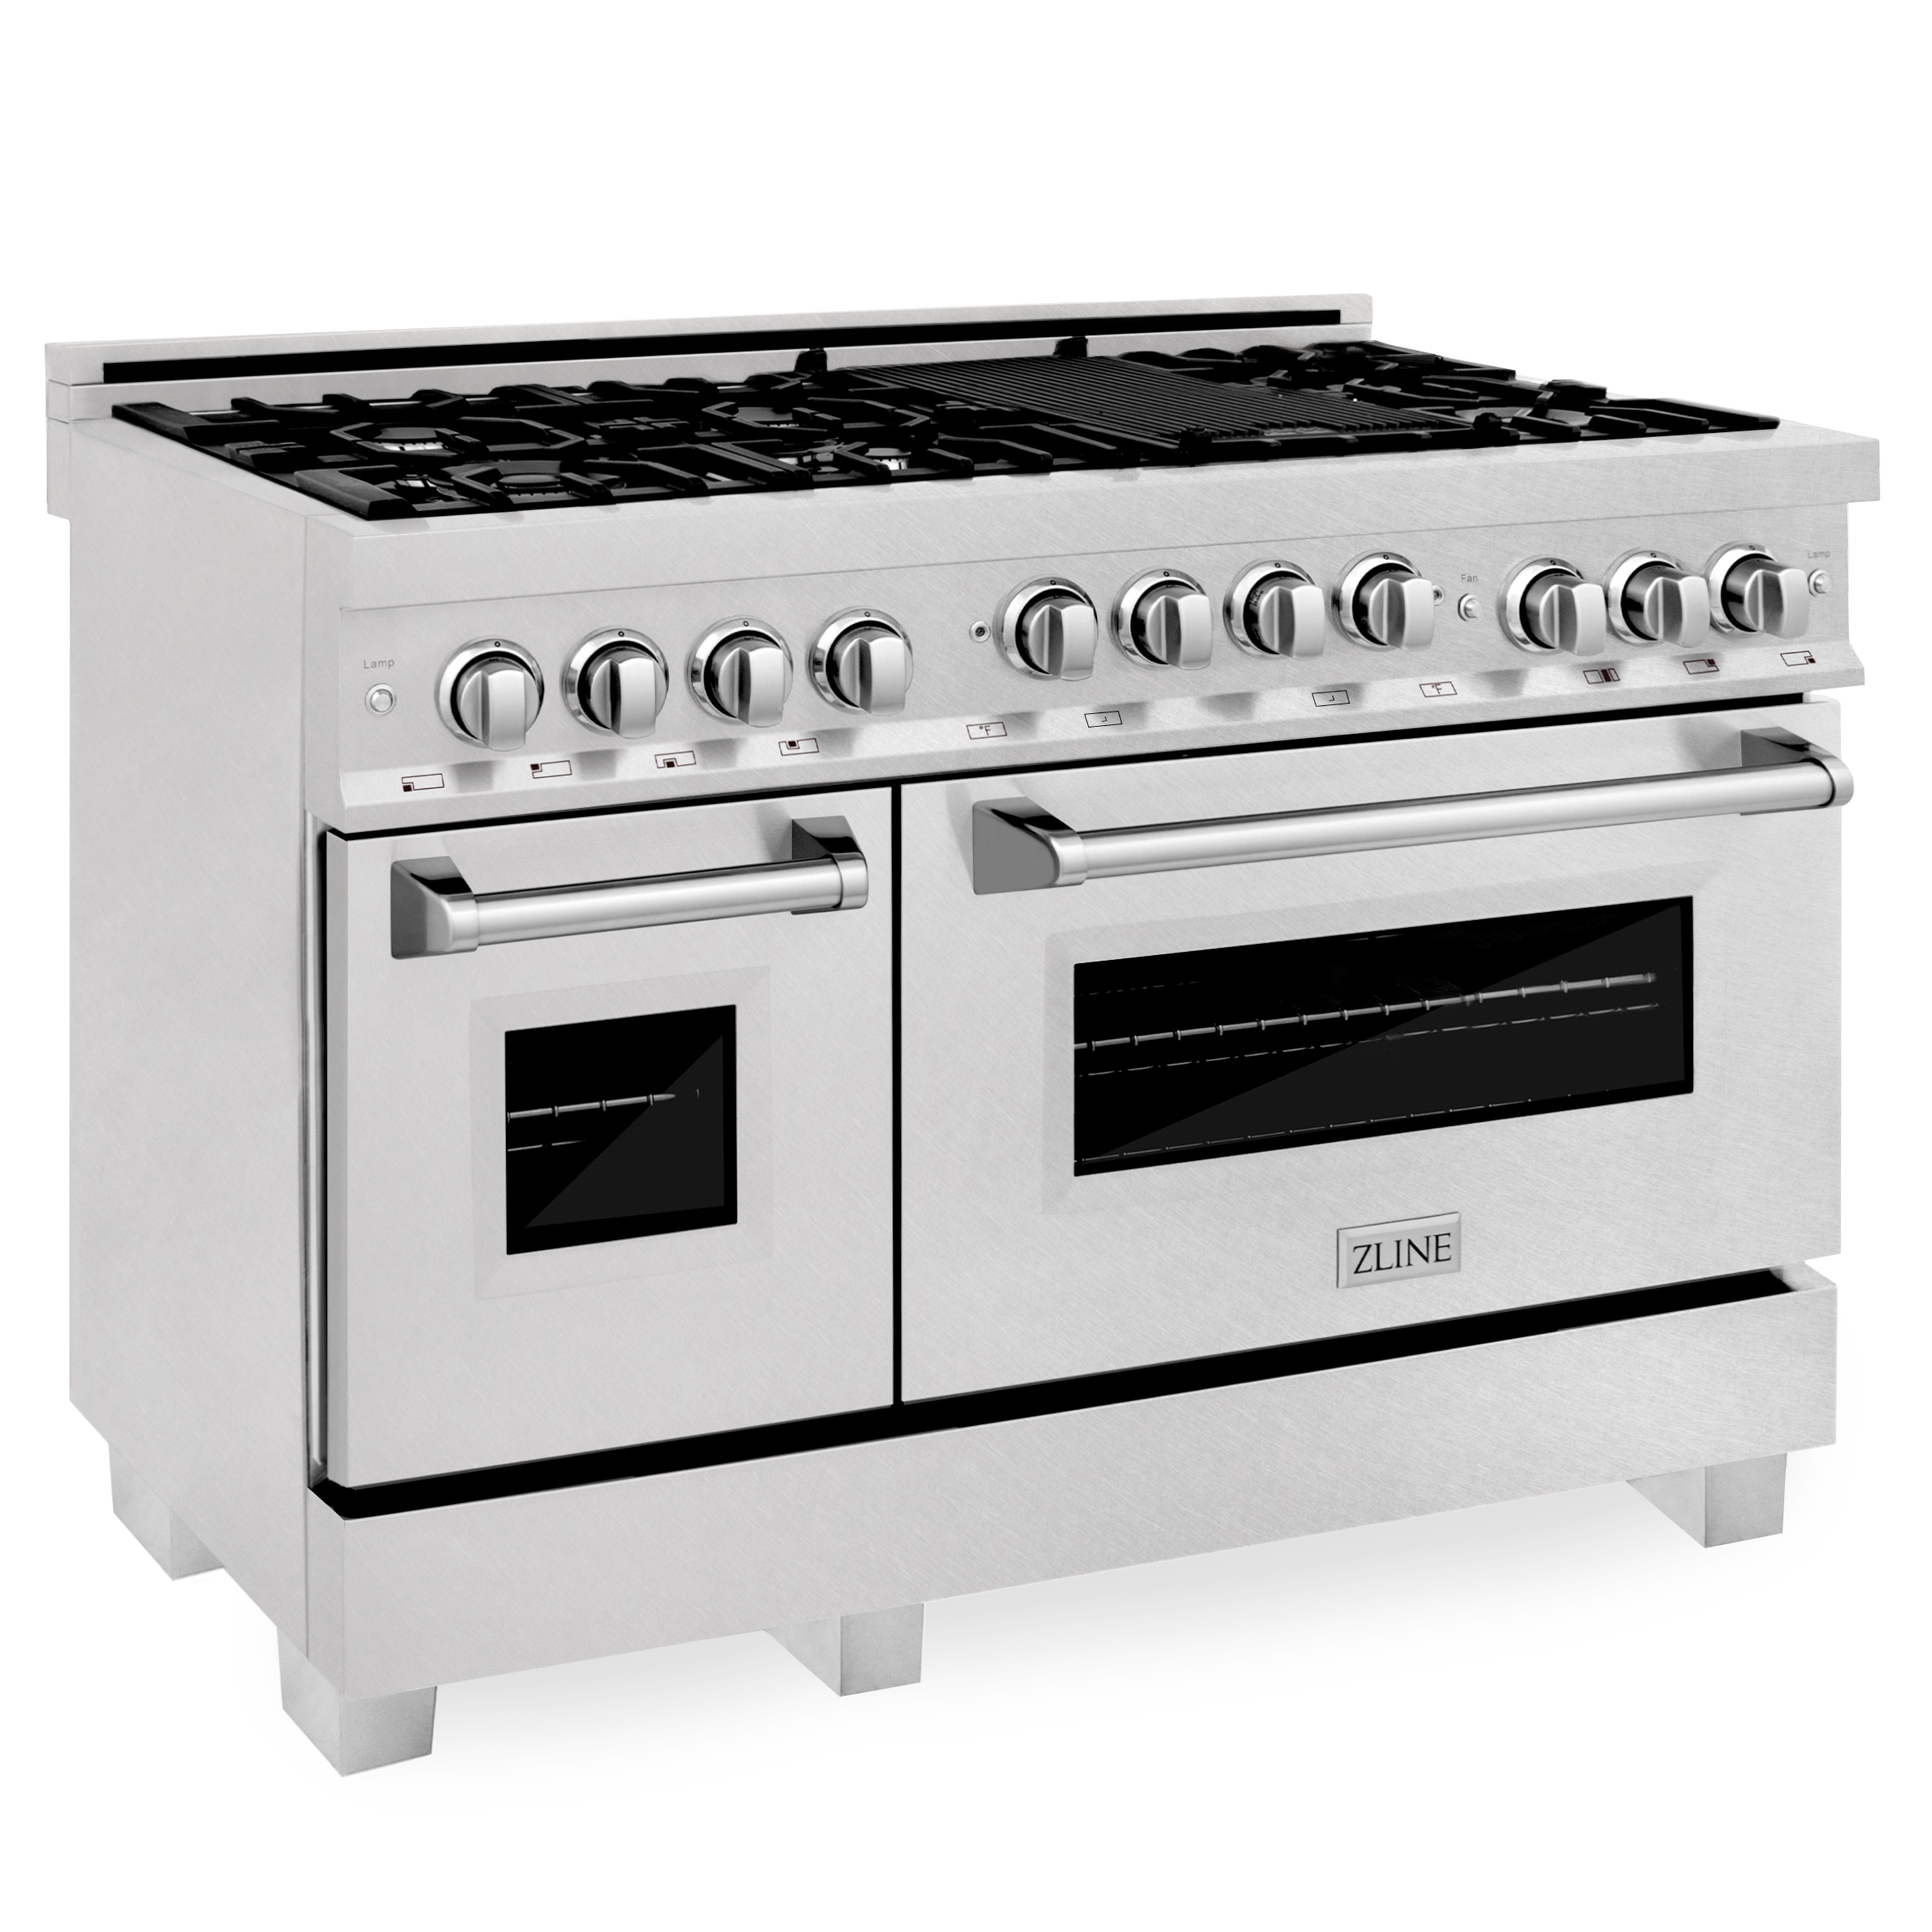 30-in Double Oven Gas Ranges at Lowes.com